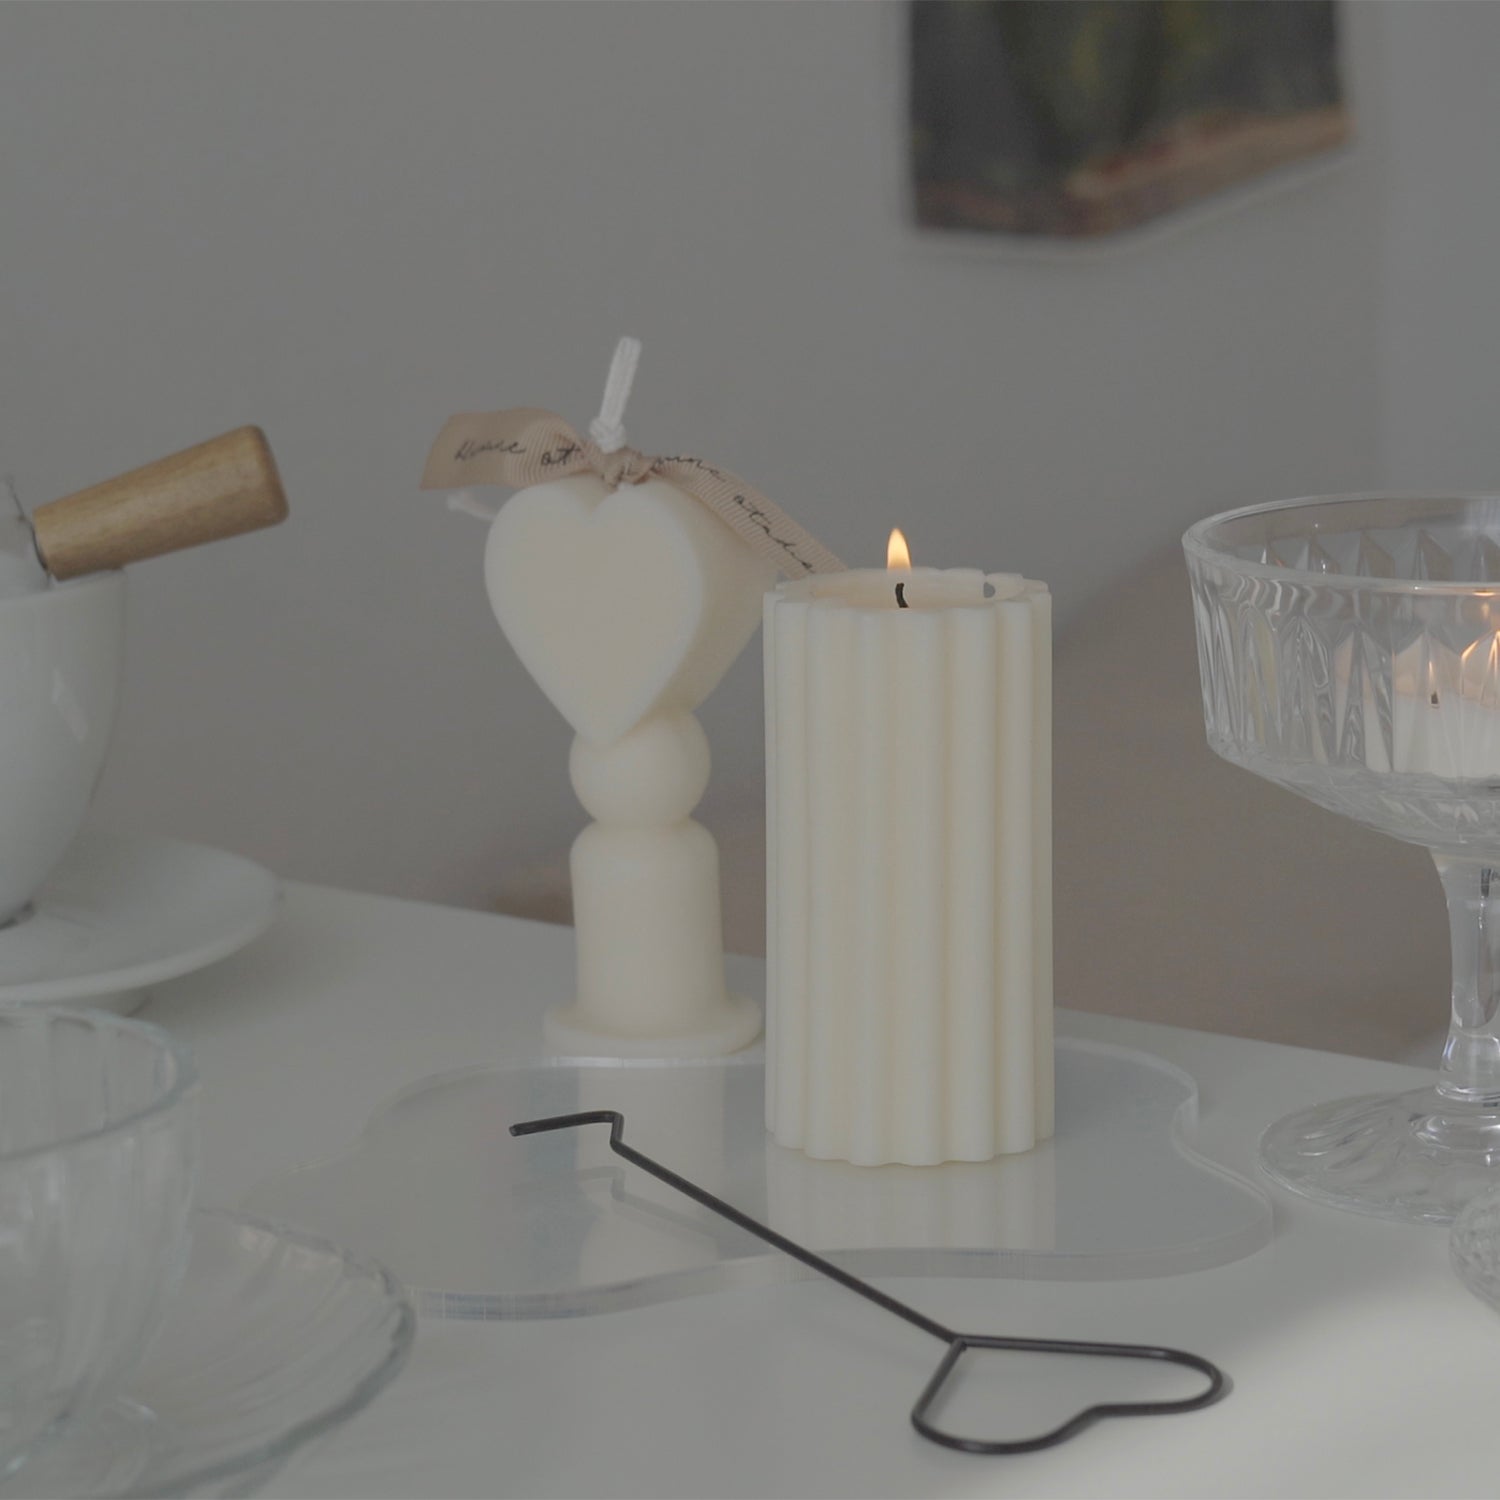 Heart shape candle, a burning ribbed pillar candle on a clear irregular shape acrylic coaster with a black metal heart shaped wick dipper, and a lit tealight candle in a glass coupe are placed on white drawer. The arrangement exudes minimal aesthetic dreamy vibes